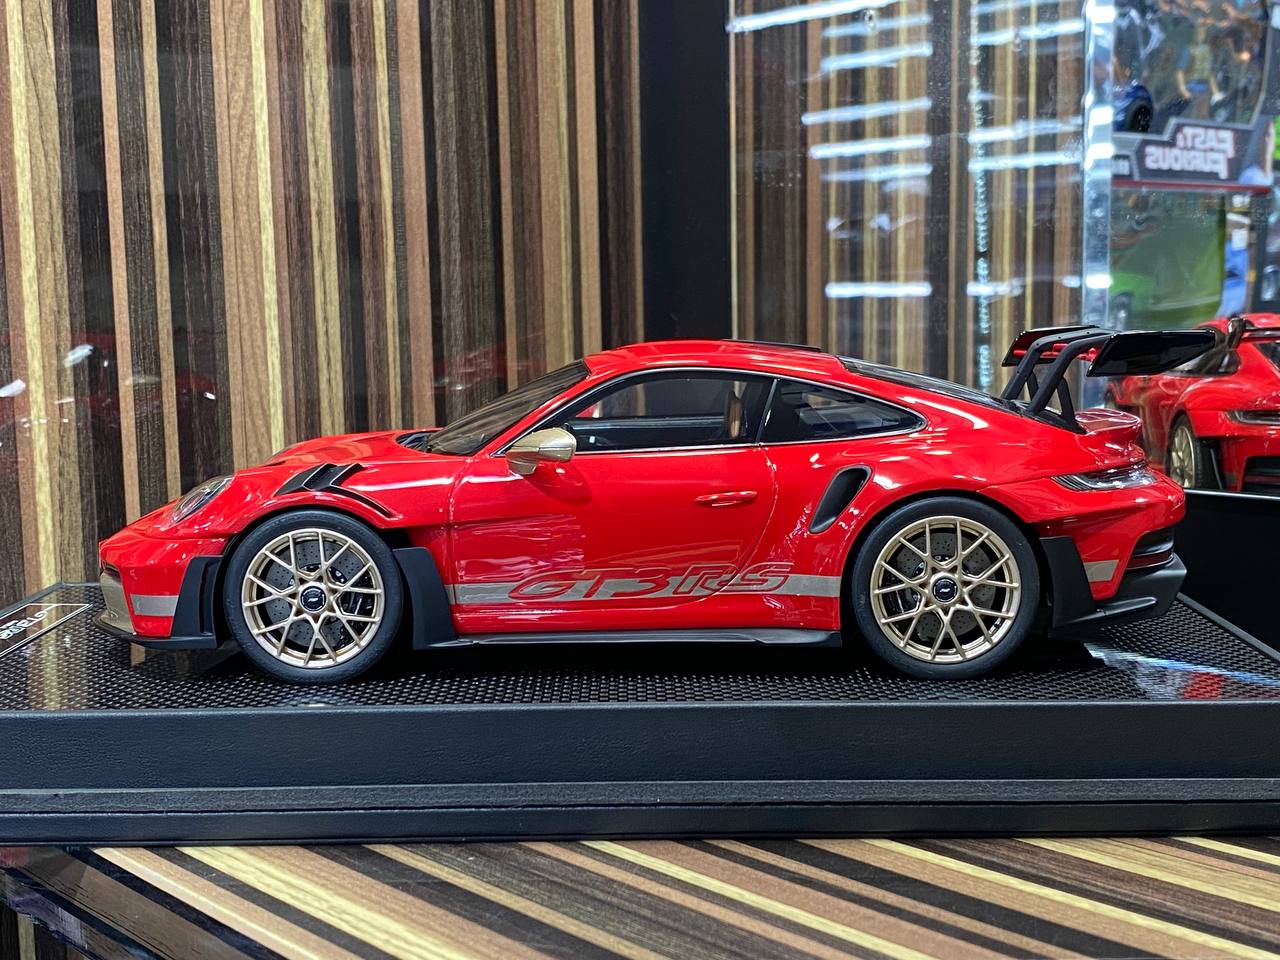 Porsche 911 GT3 RS 992.1 Gold Wheels Red by Timothy & Pierre